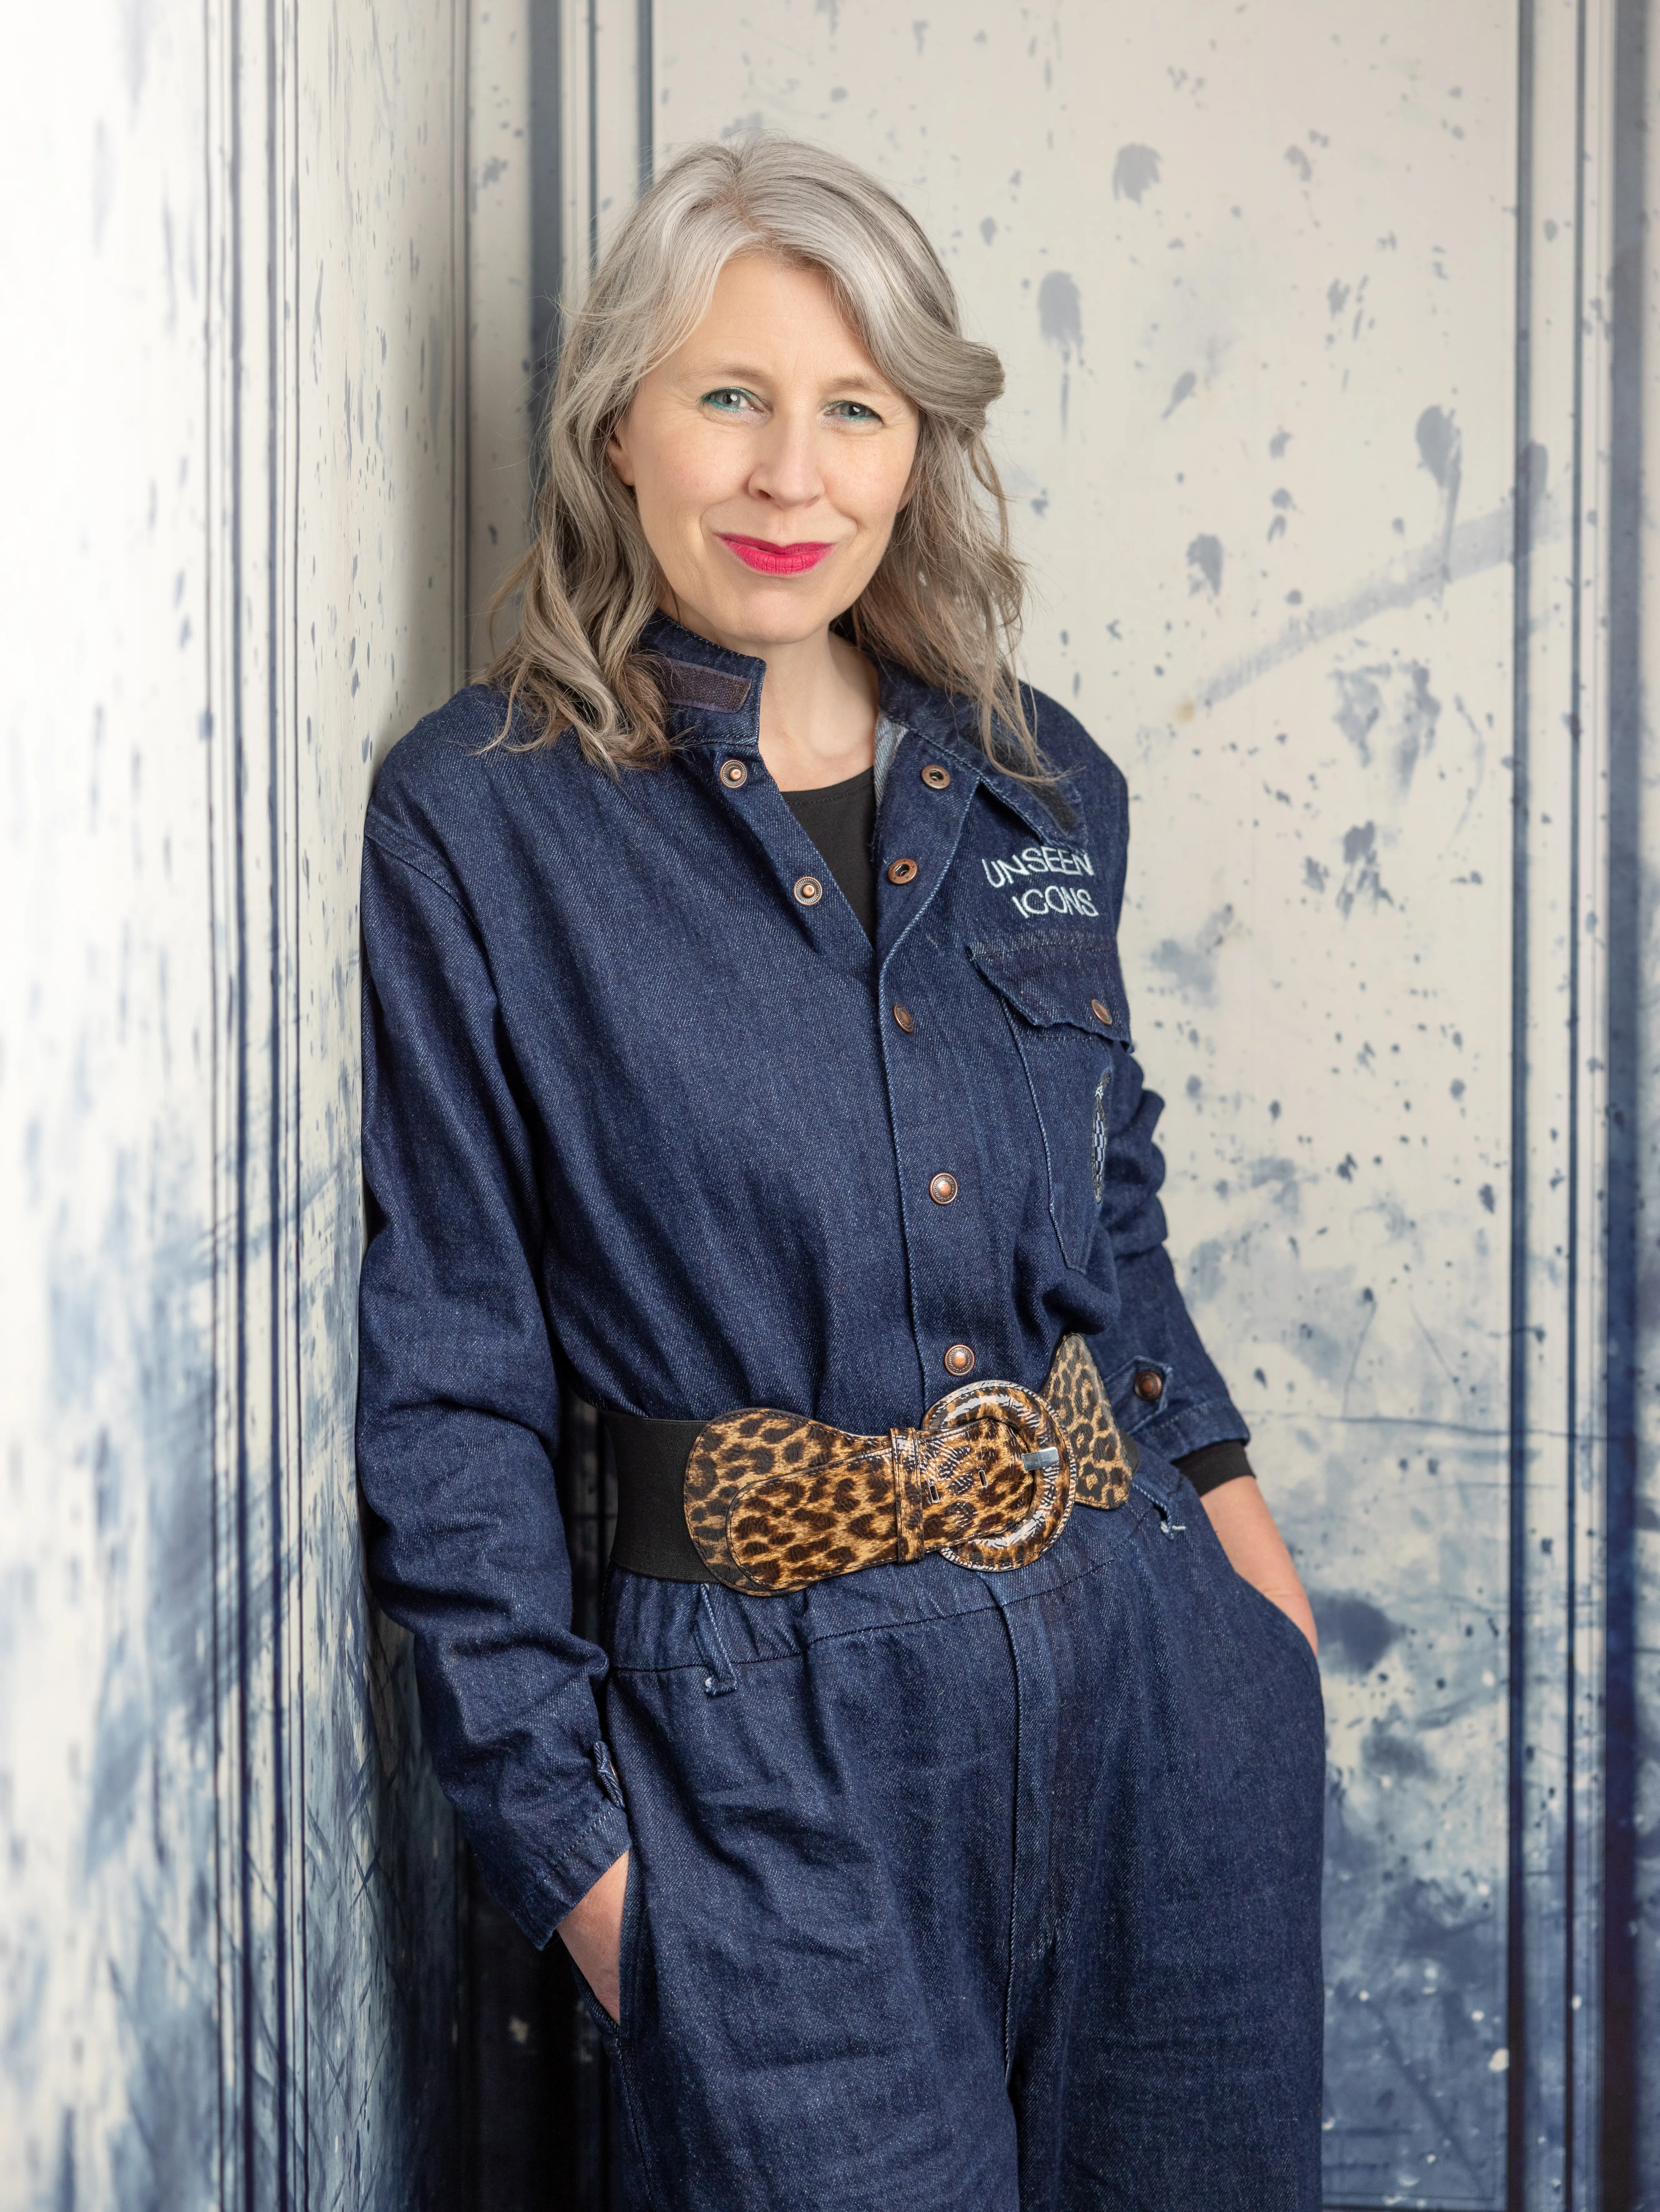 Unseen Icons founder Kerry Rutter leaning against a blue marbled wall in her studio wearing a denim boiler suit embroiled with Unseen Icons name